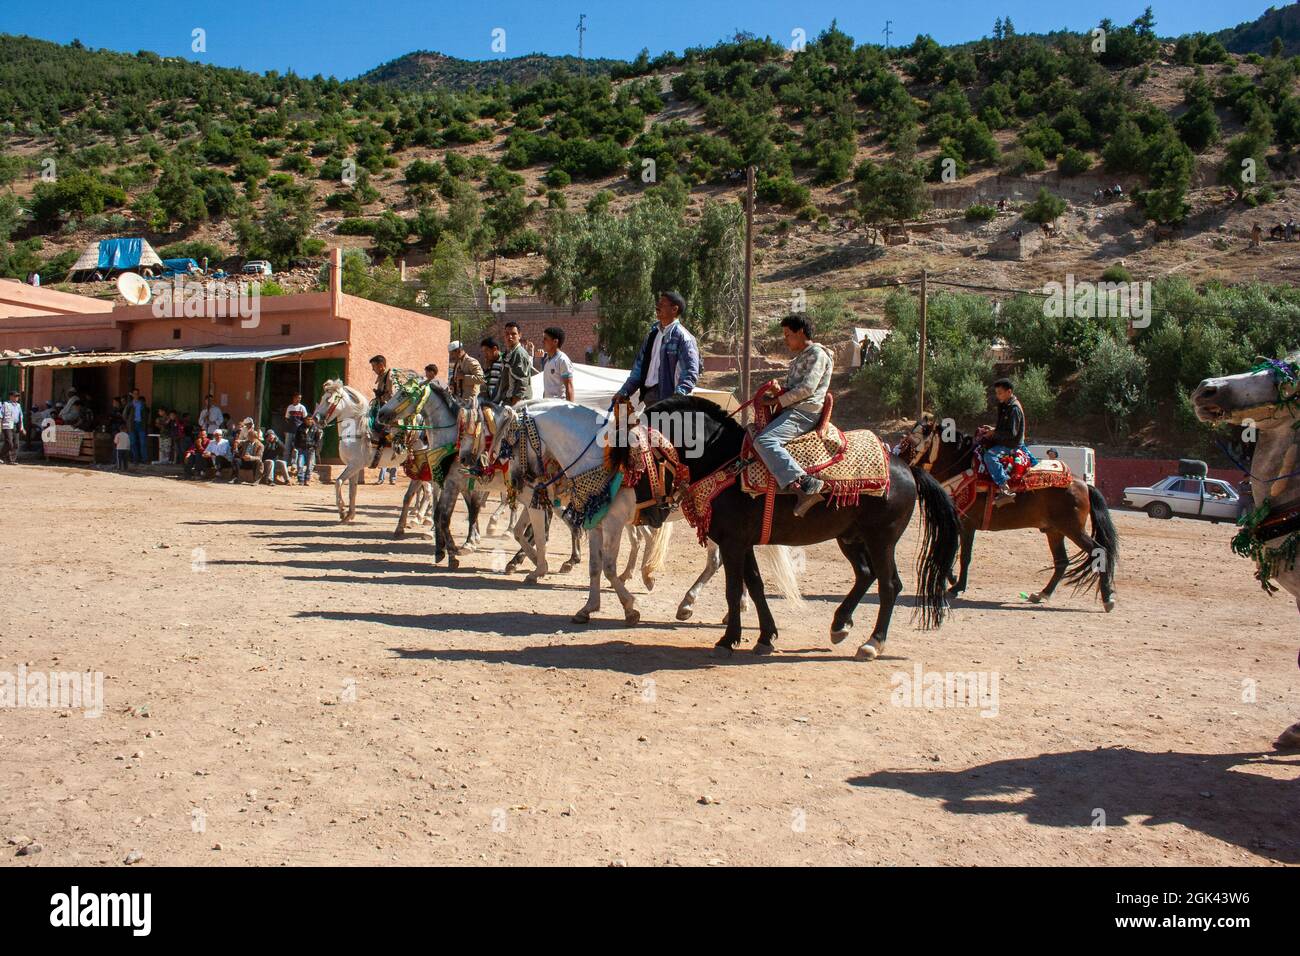 Horse riders in Festival Fantasia in rural Morocco - a traditional Berber spectacle of horsemanship Stock Photo